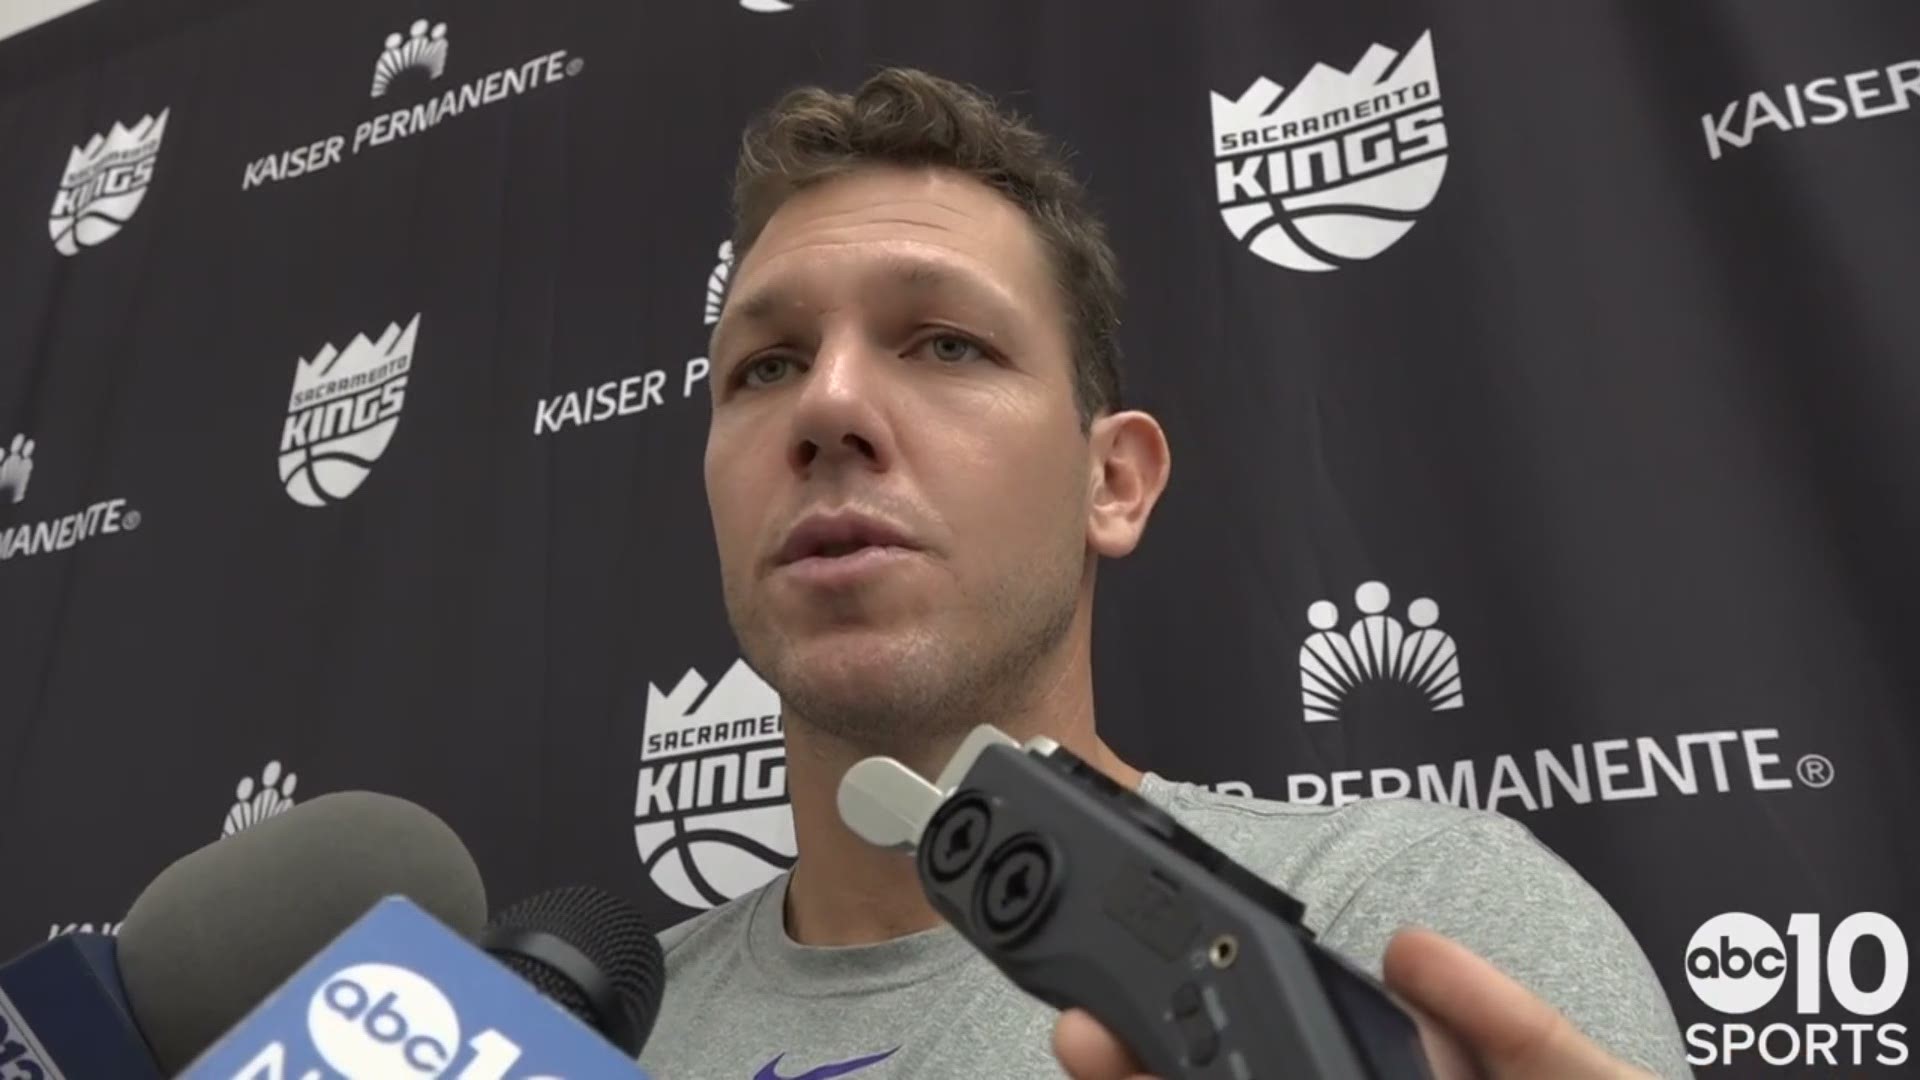 Sacramento Kings' coach Luke Walton talks about Wednesday's season opener in Phoenix against the Suns and the contract extension Buddy Hield received.